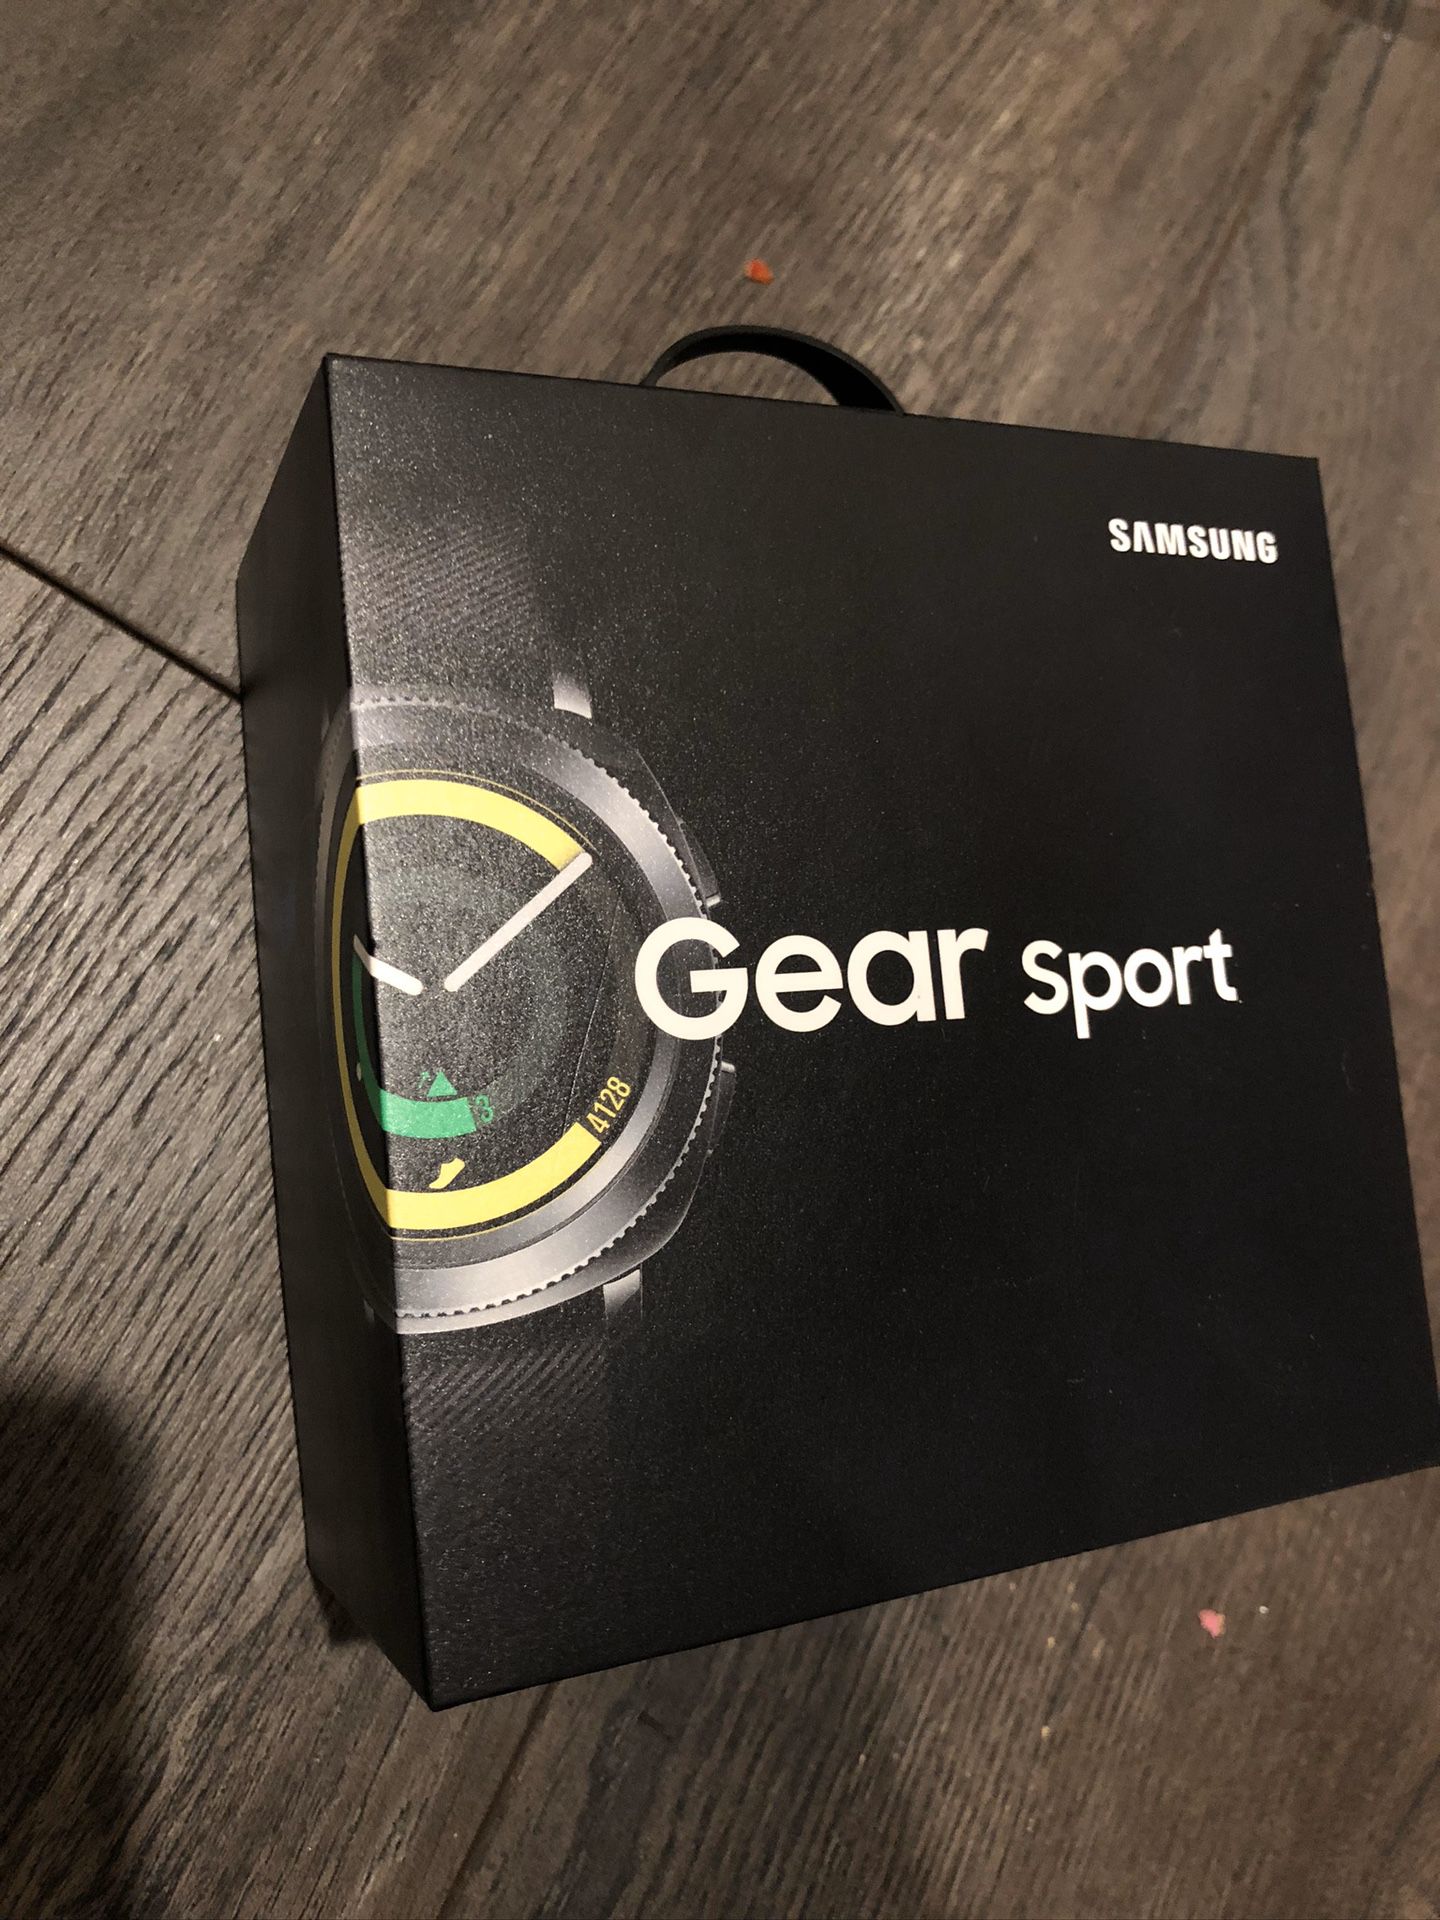 Samsung gear sport and gear fit2 pro